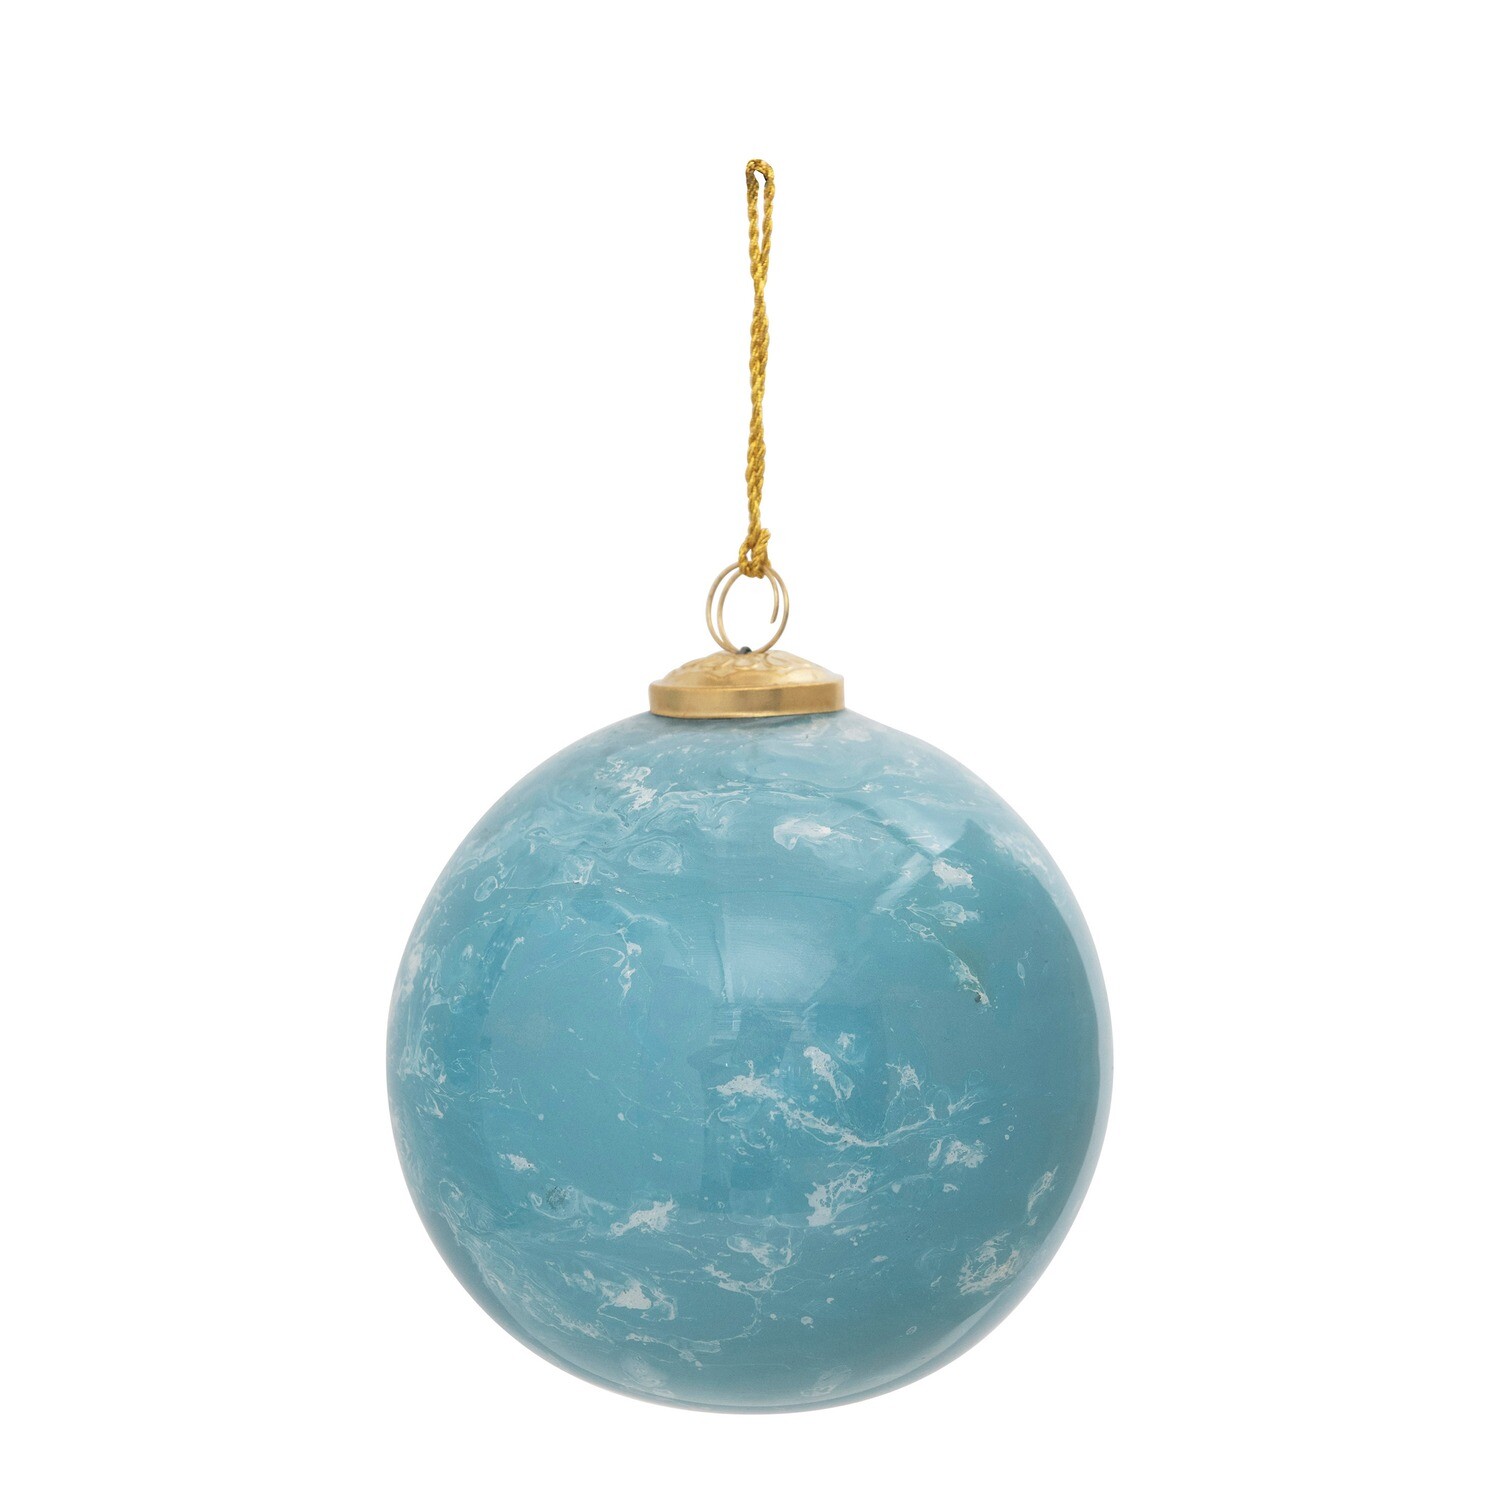 5" Marbled Blue Ornament